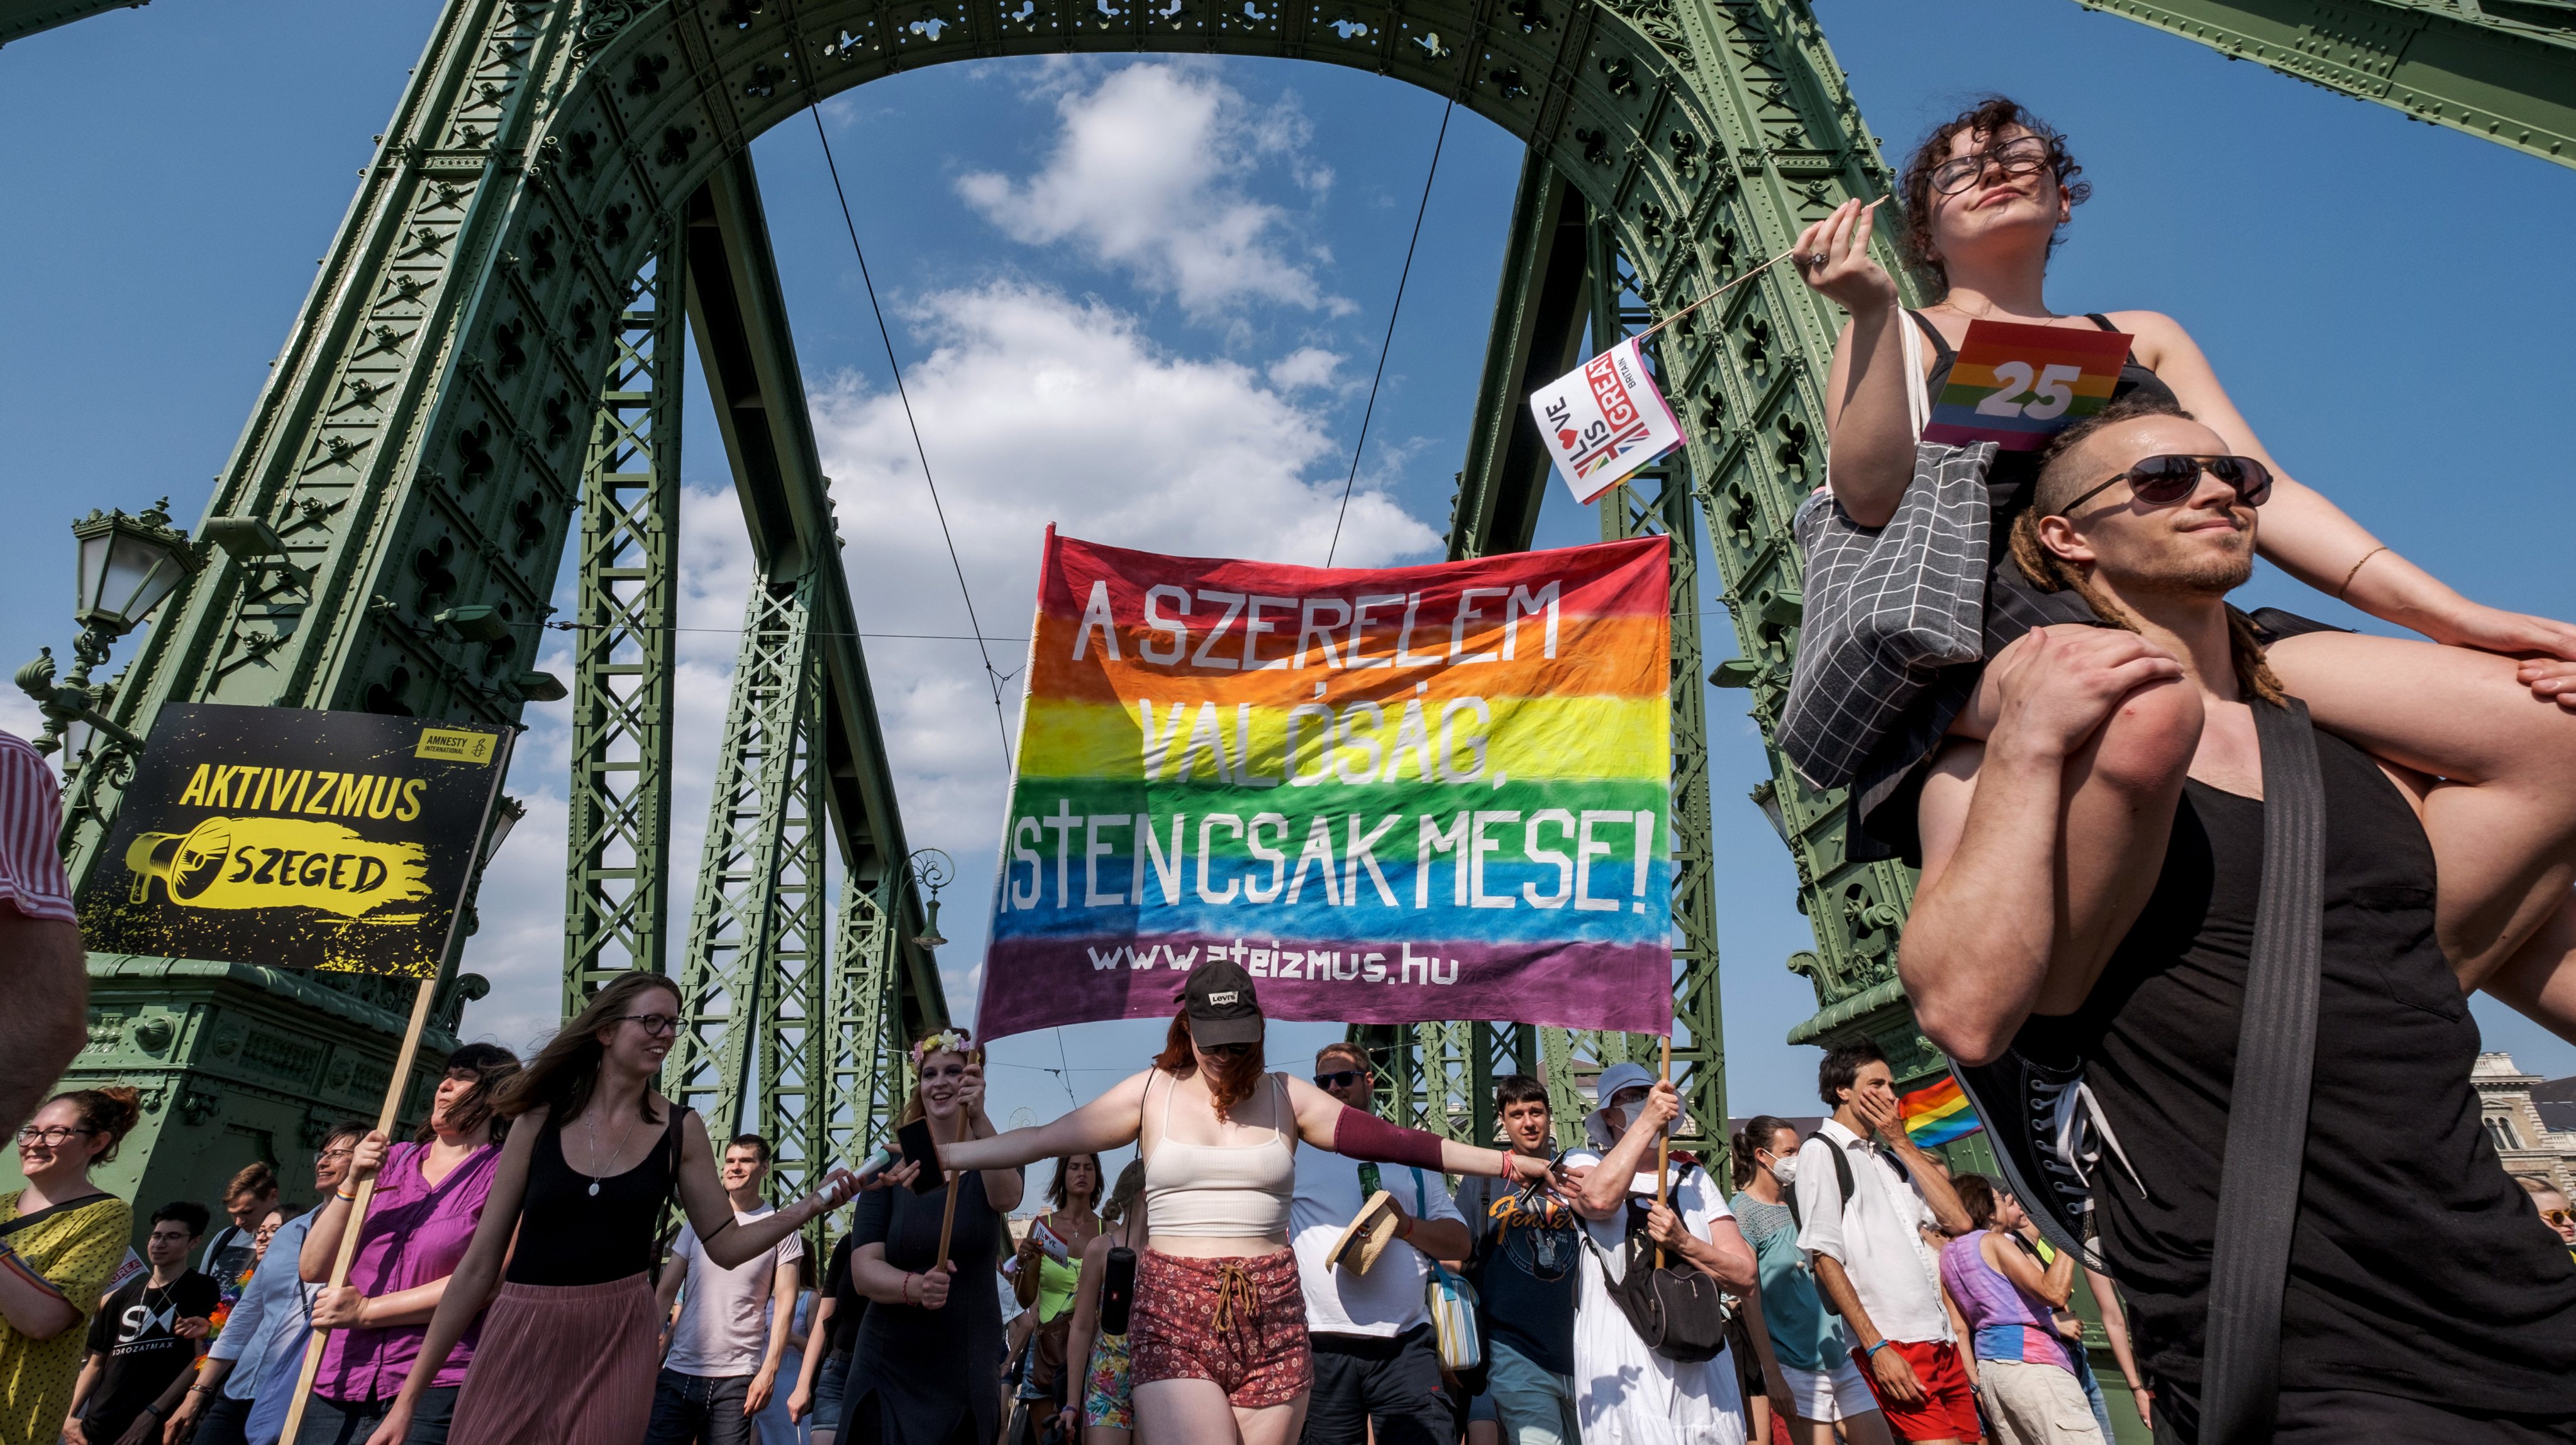 Budapest Pride March Takes Place Against A Backdrop Of The Hungarian Government&#039;s Anti-LGBT Campaign